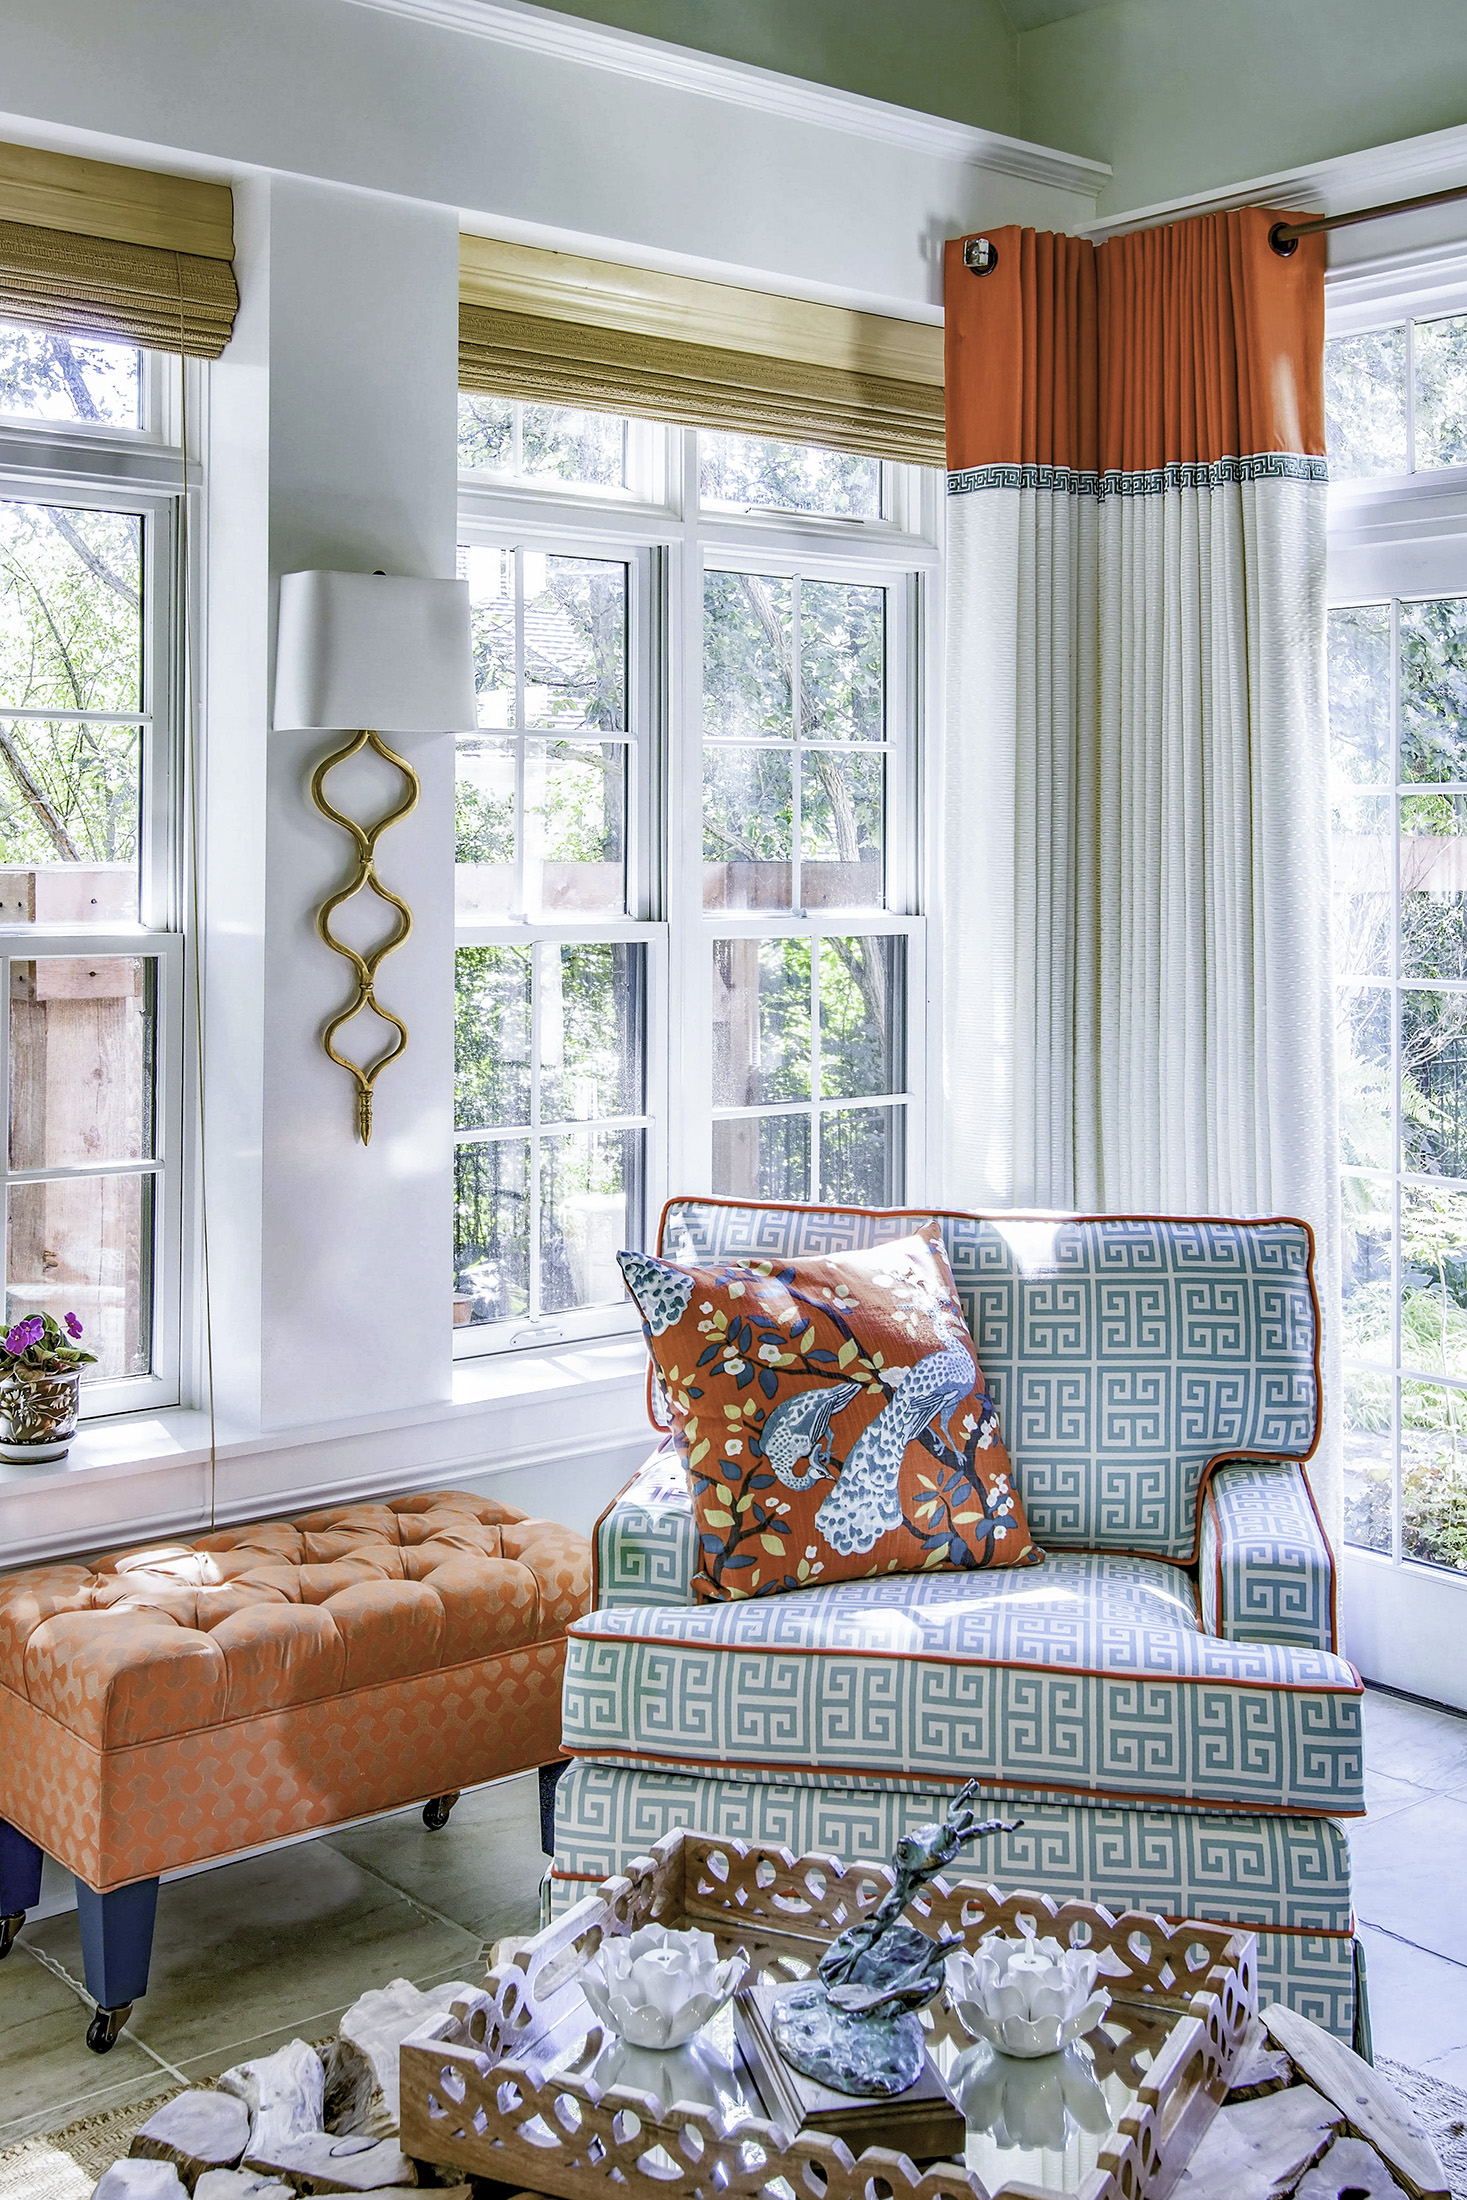 Aqua and coral chair and drapery in sunroom